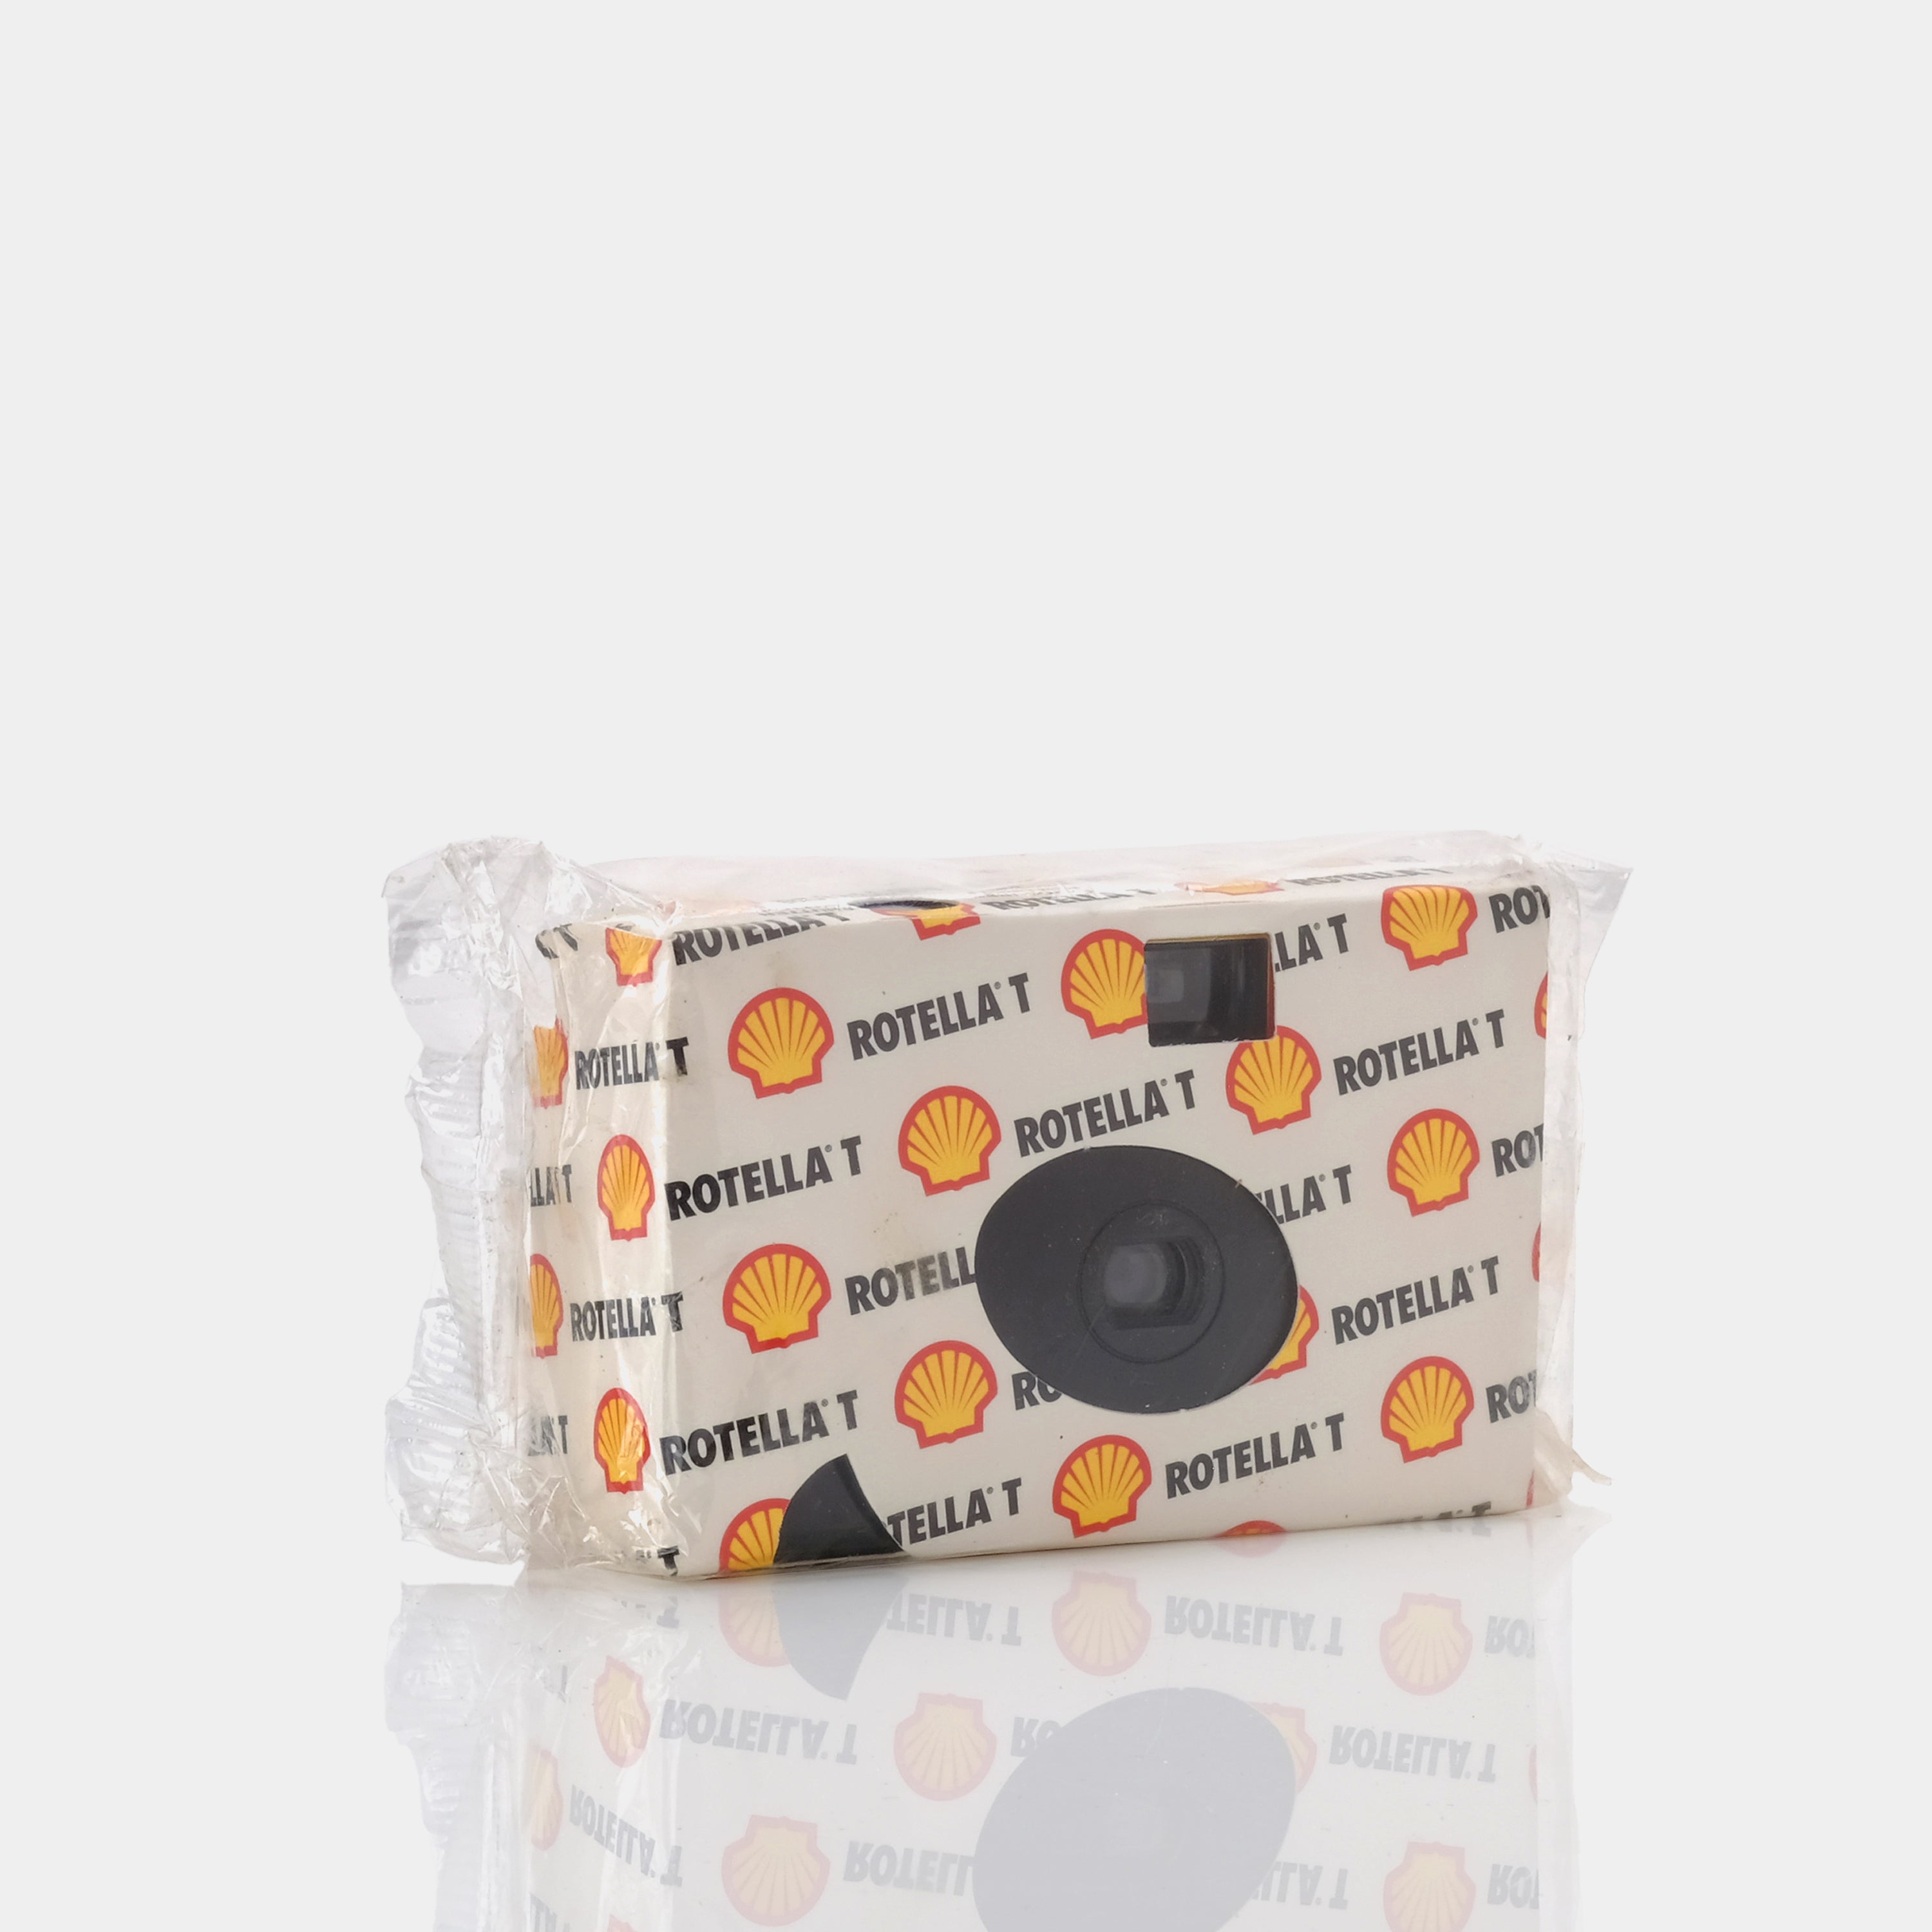 Vintage Promotional Rotella T Disposable 35mm Film Camera